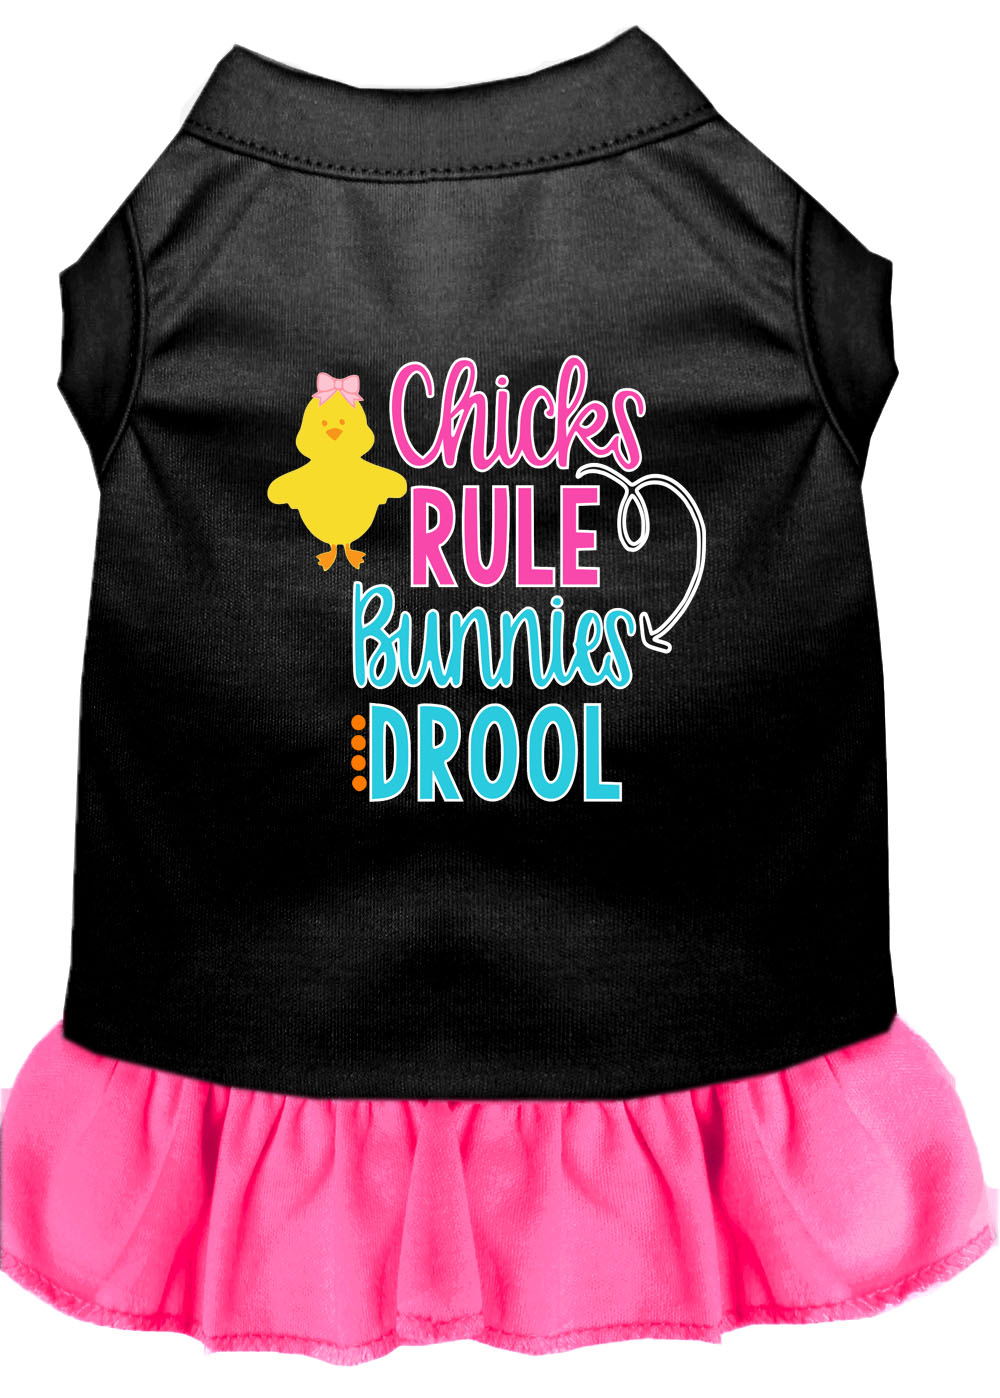 Chicks Rule Screen Print Dog Dress Black with Bright Pink Sm